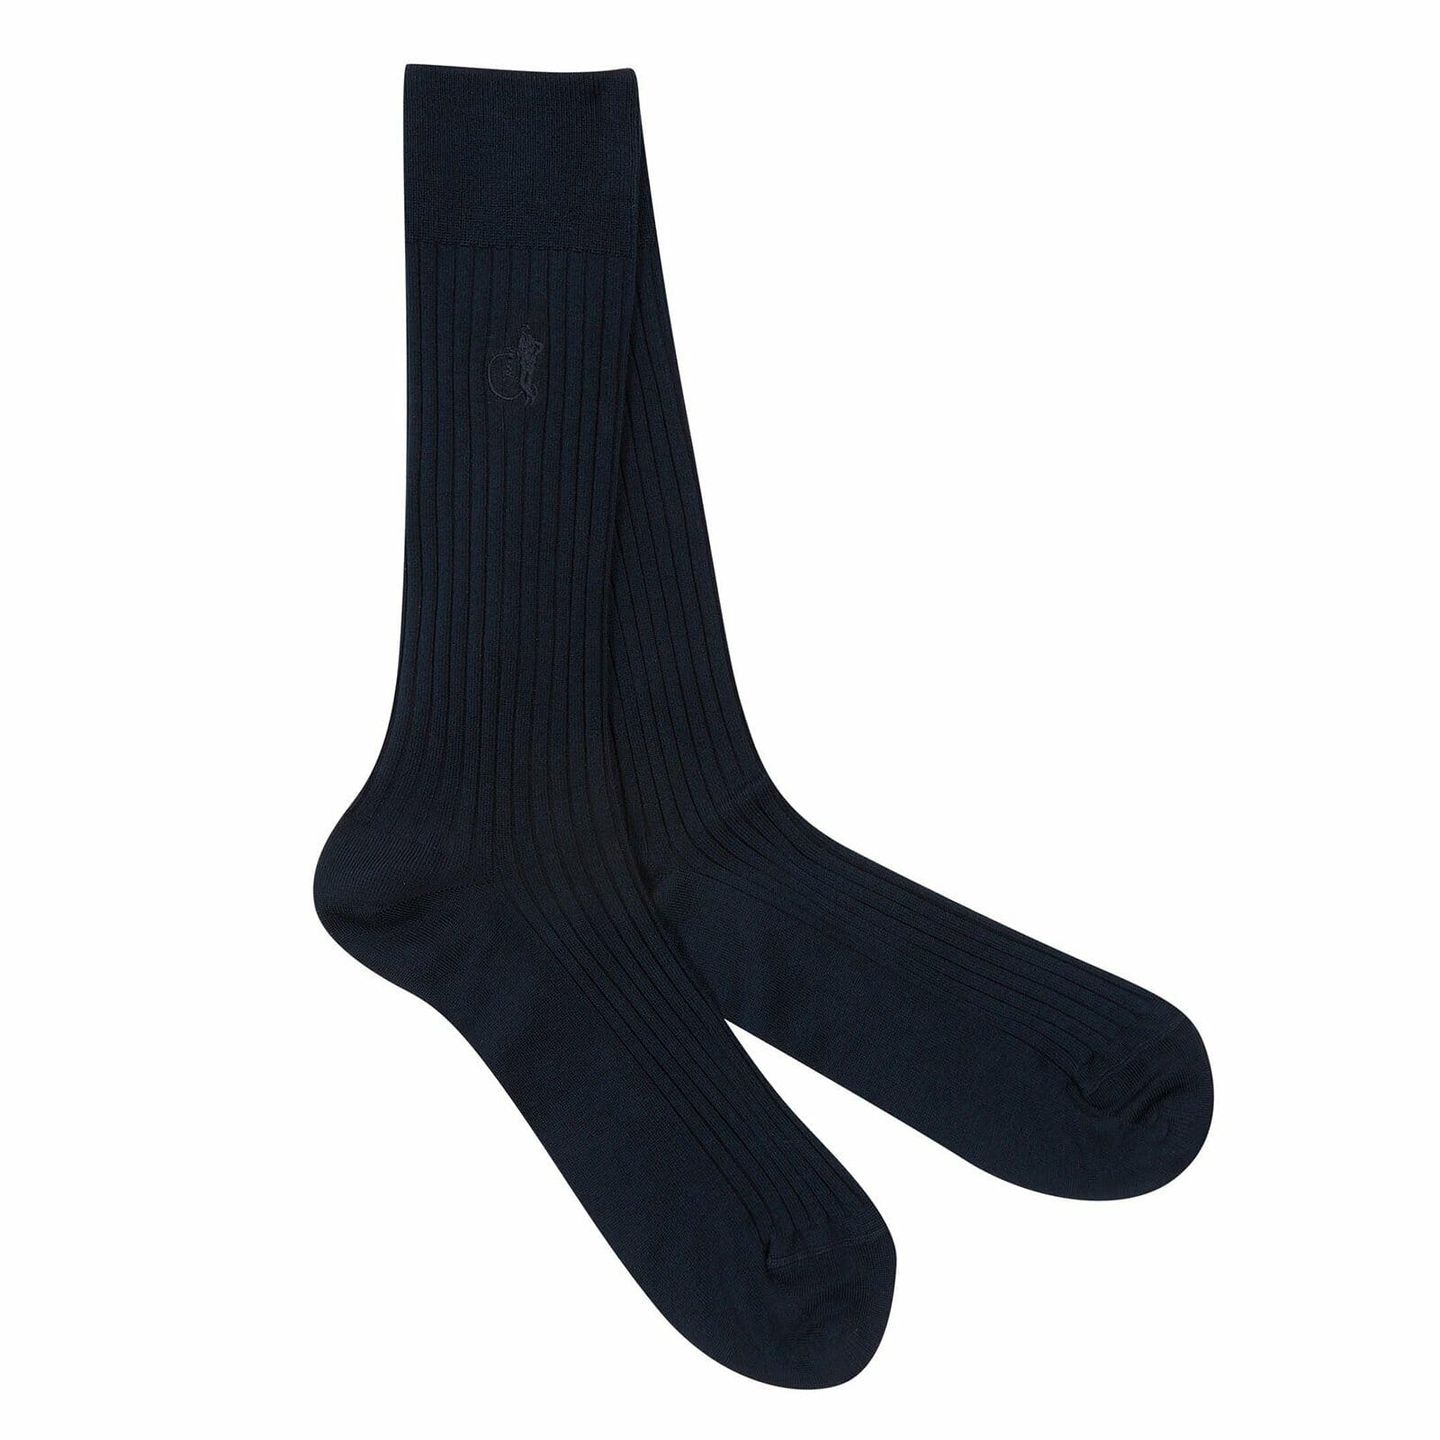 A pair of black socks with a white background